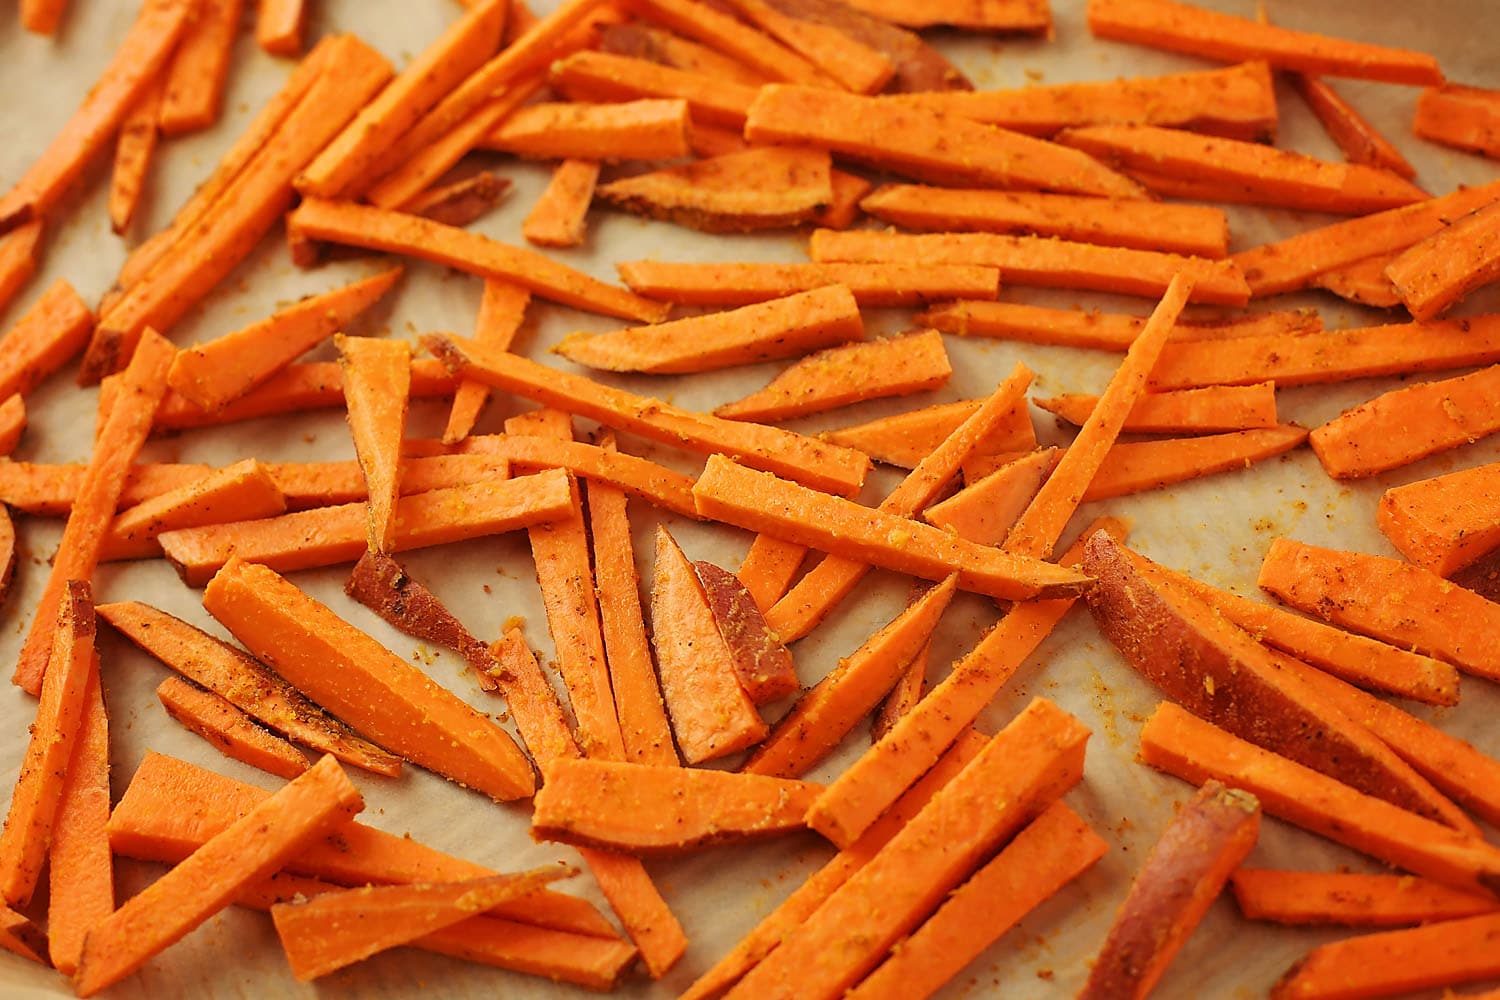 sheet pan with sweet potato sliced to make french fries